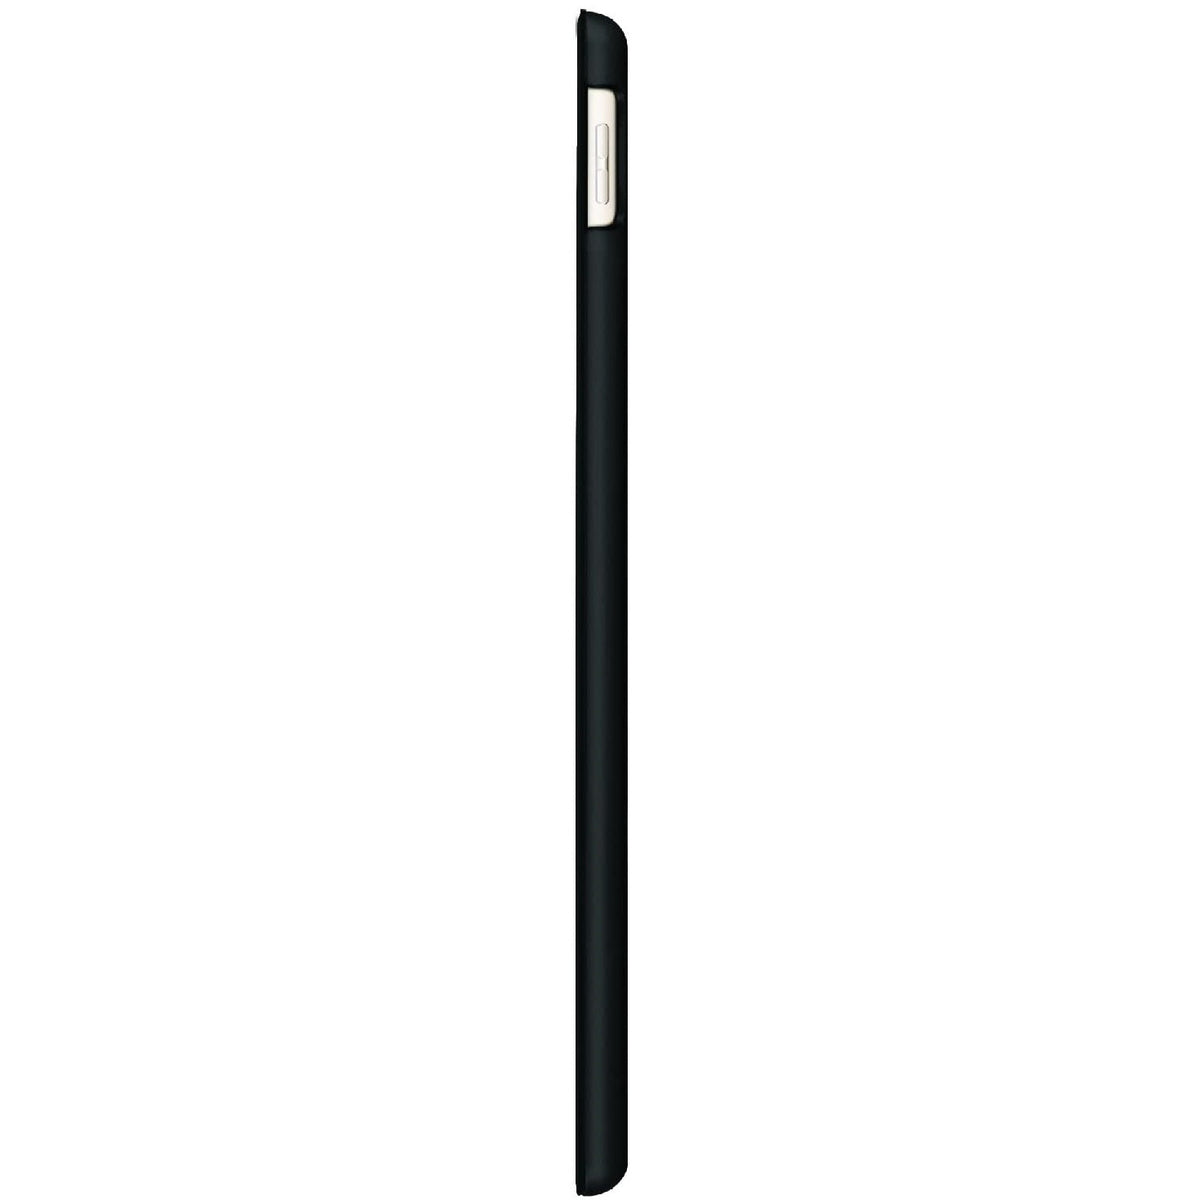 Macally Folio Case &amp; Stand for 10.5&quot; Apple iPad Pro - Black | BSTANDPRO2S-B from Macally - DID Electrical